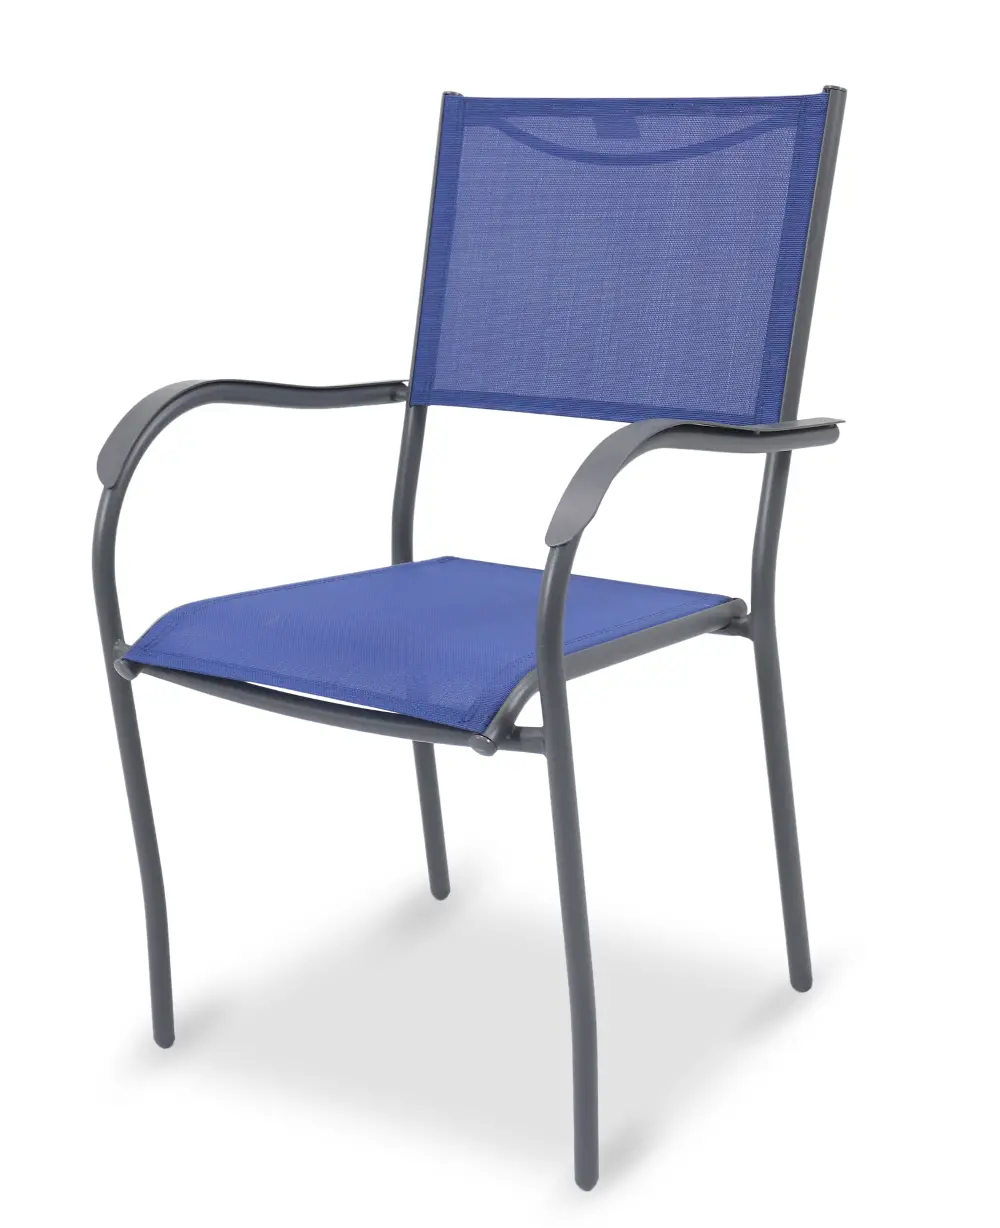 Blue Outdoor Patio Chair - Genevieve-1